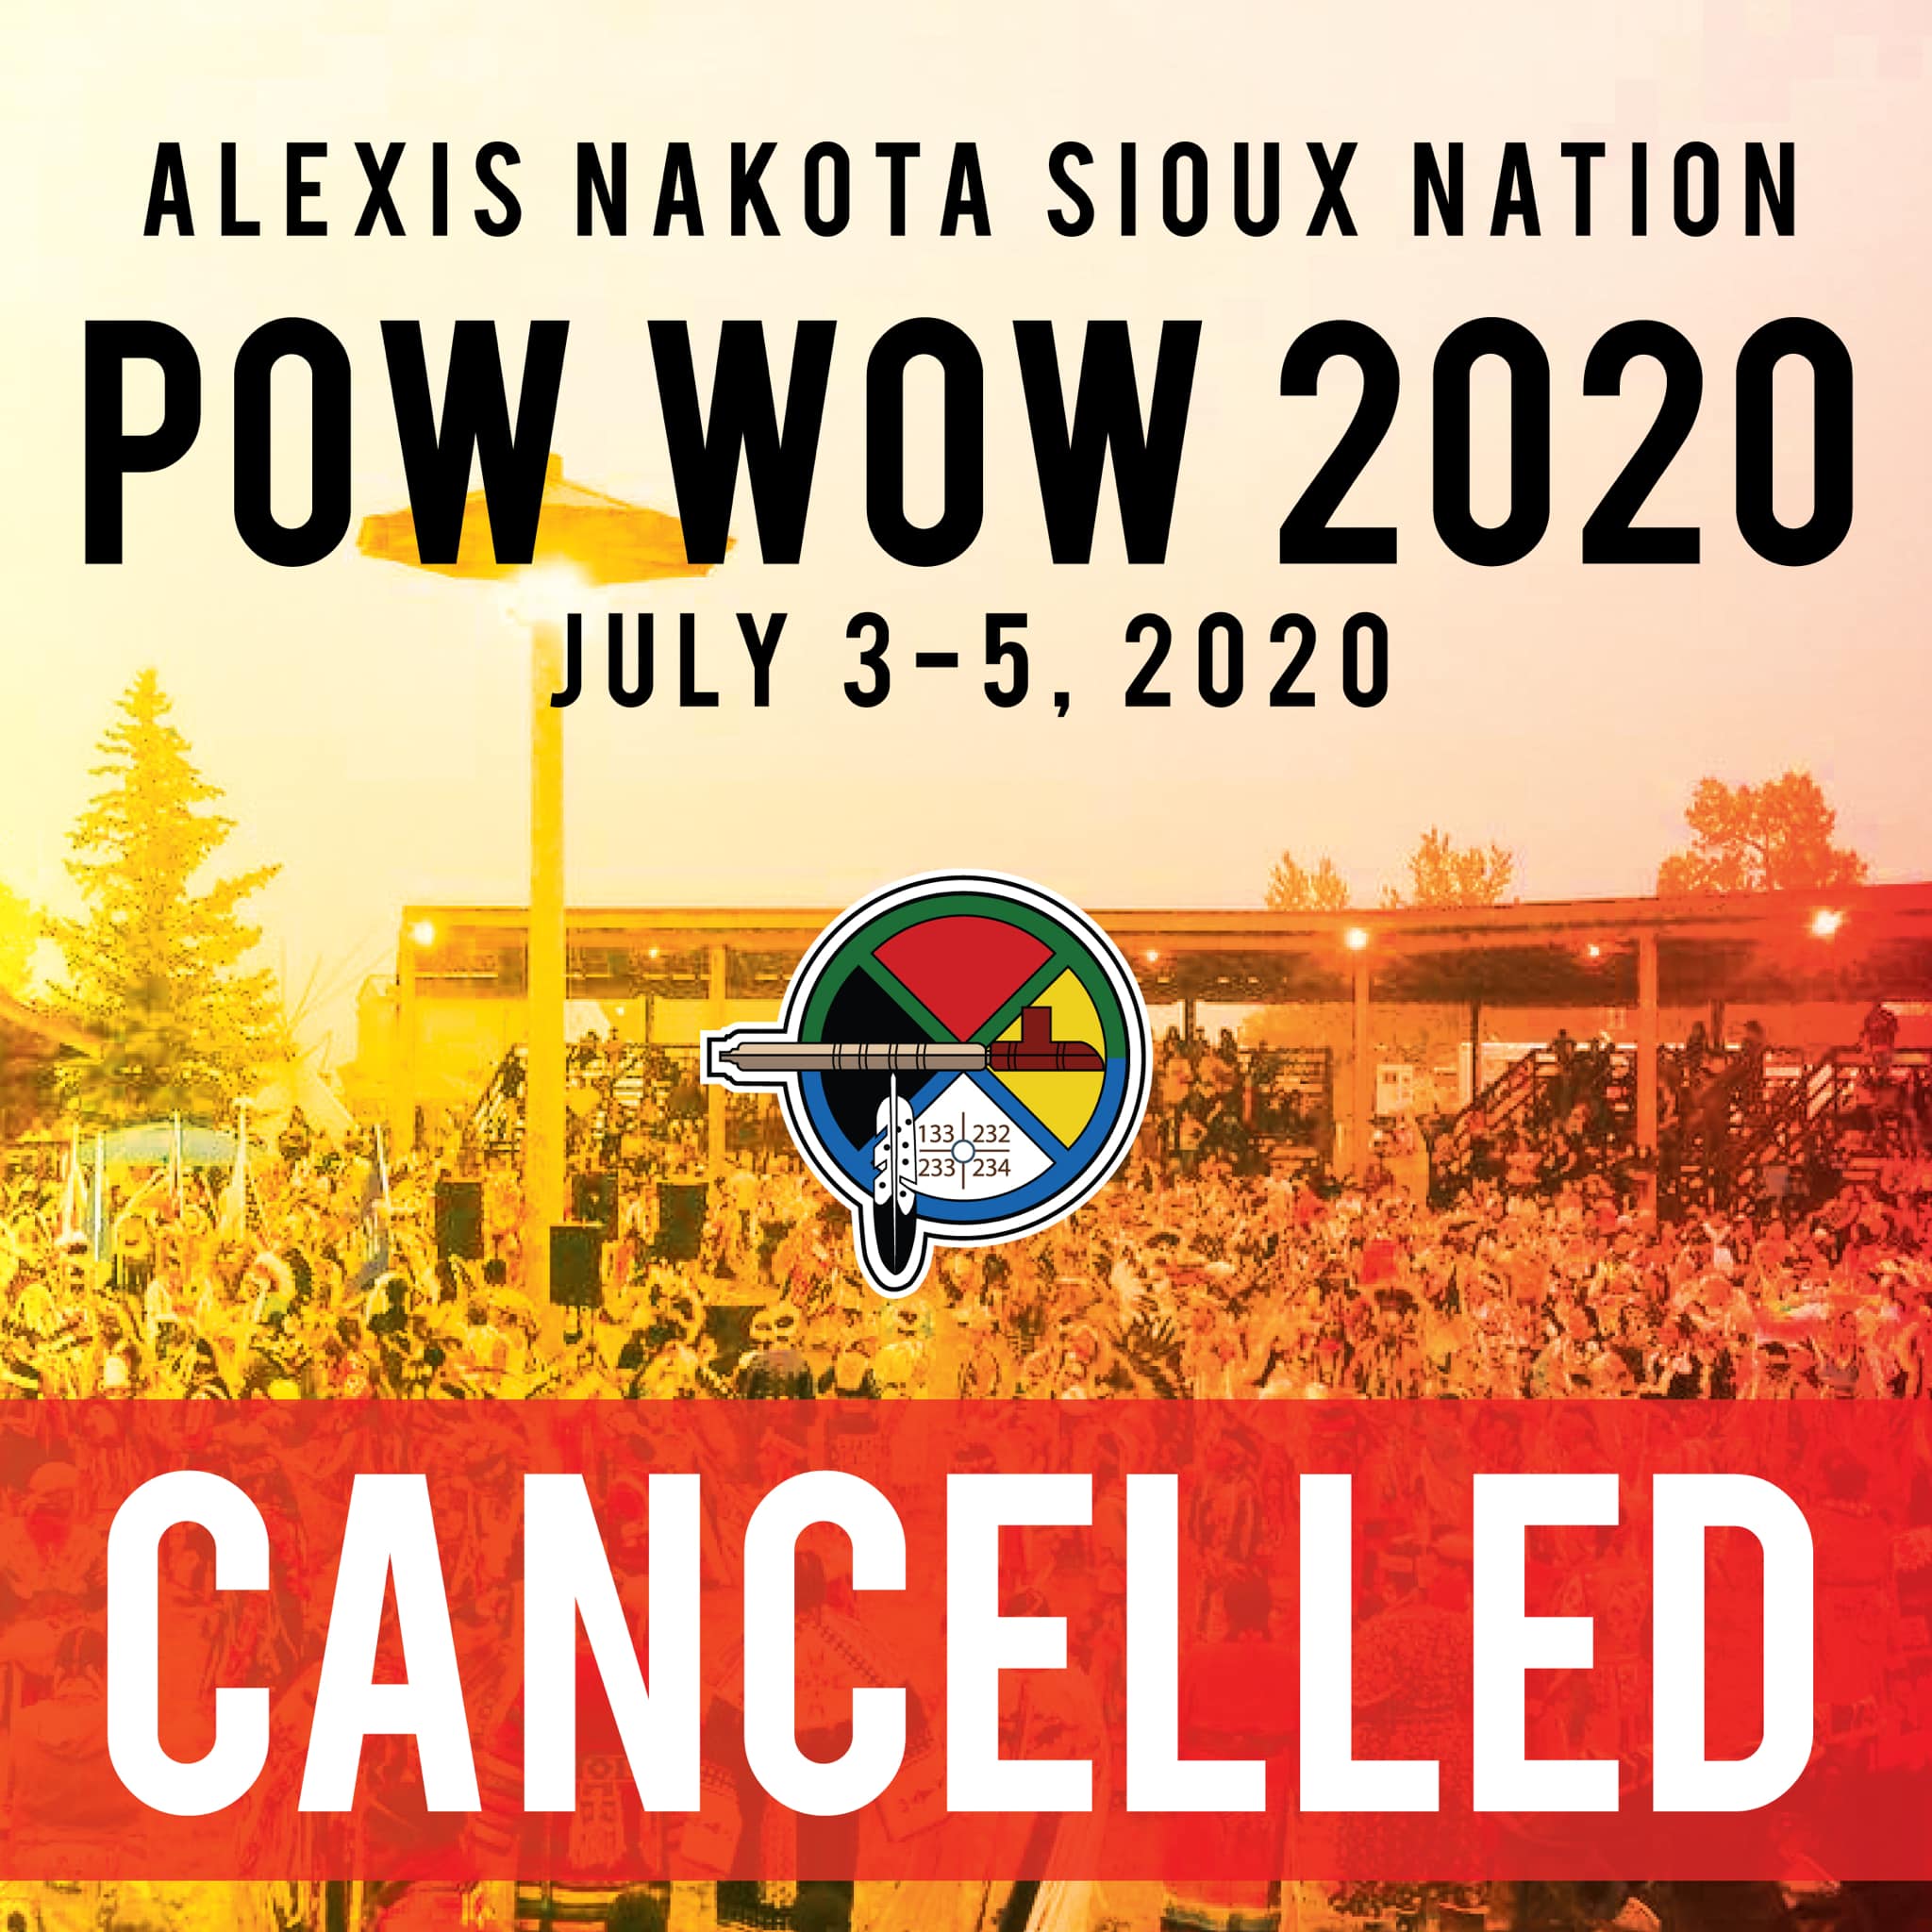 2020 Powwow 2020 is cancelled